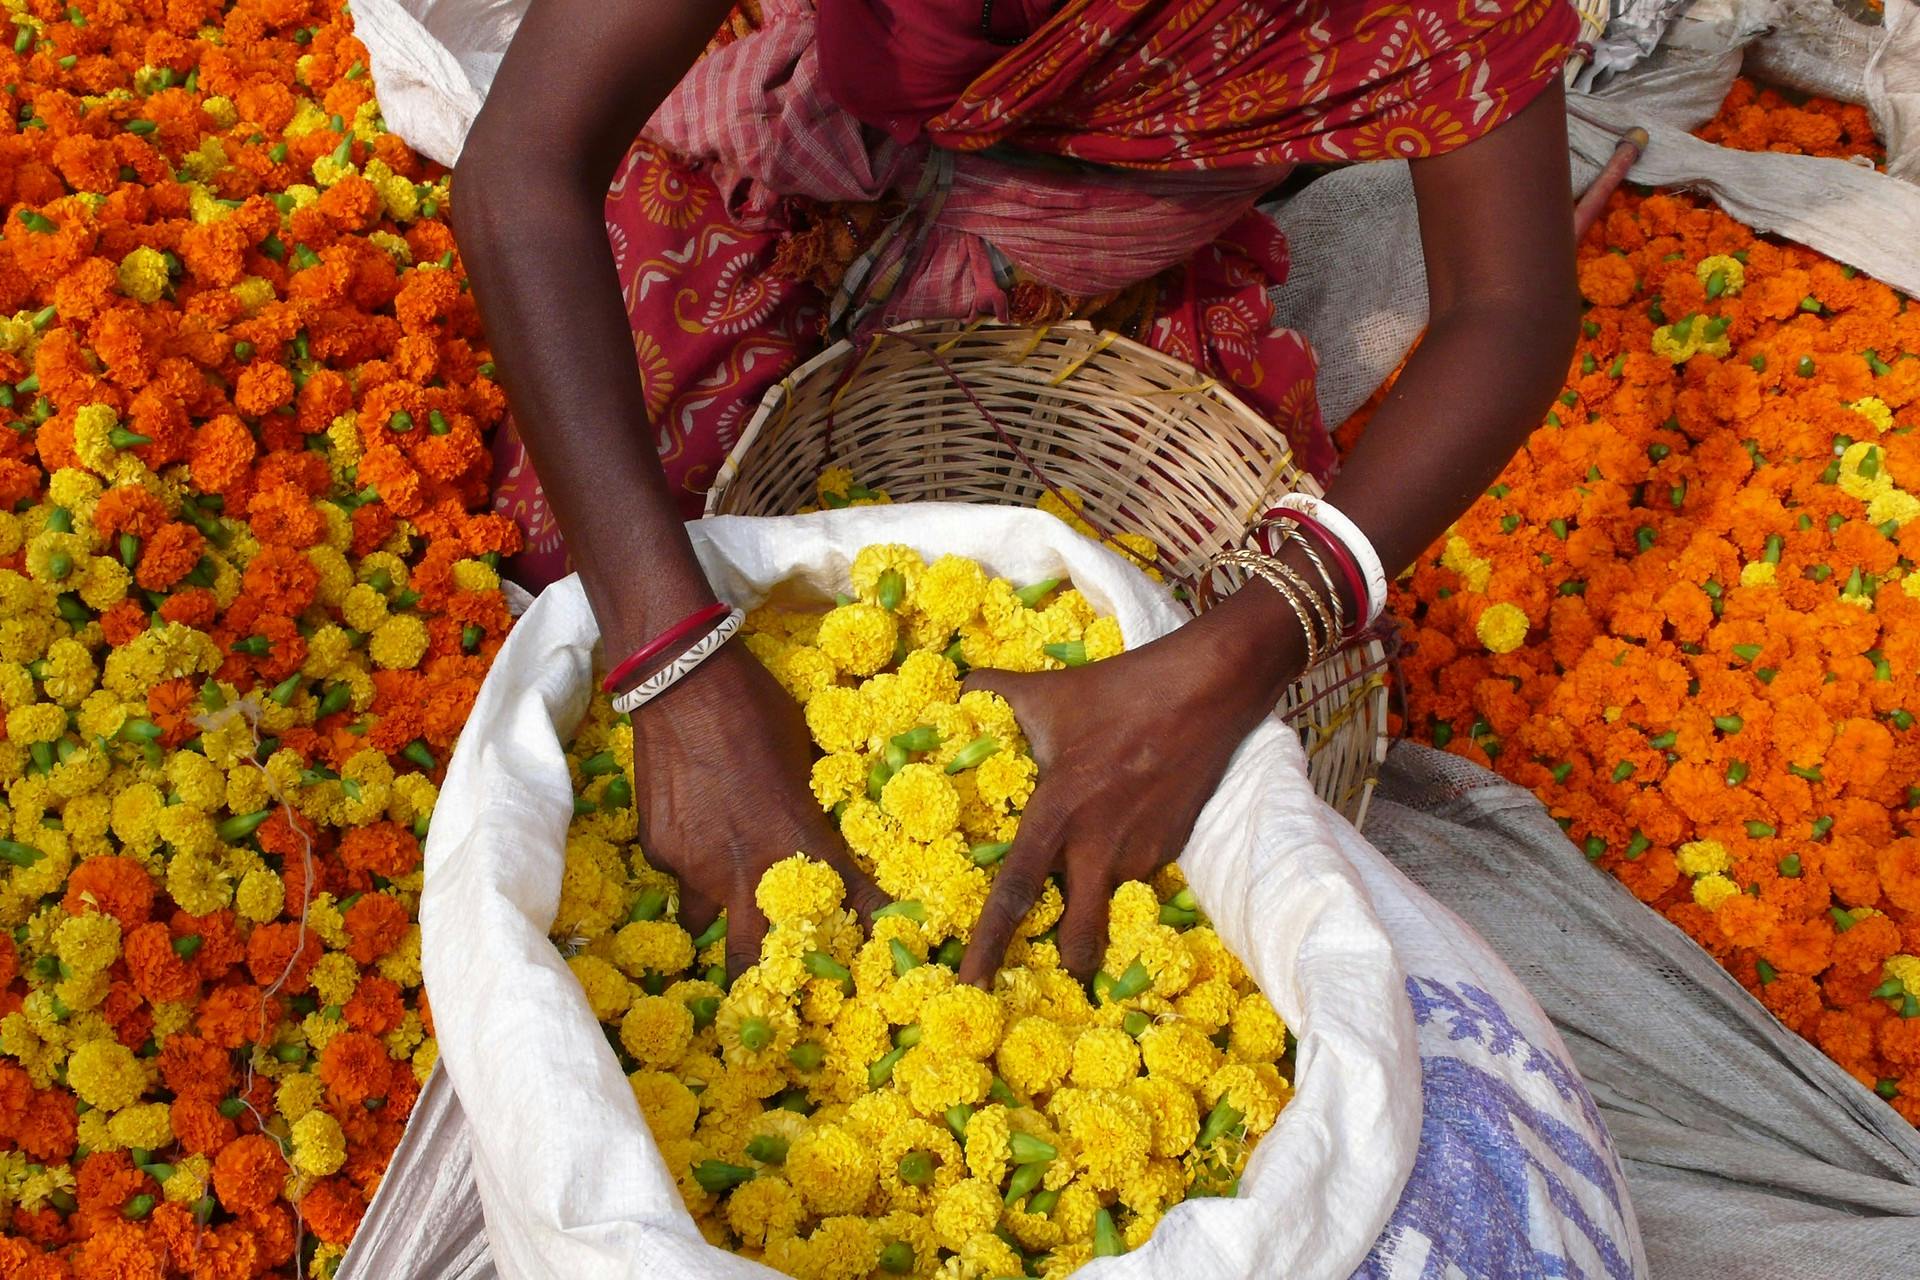 Woman selling flowers in India